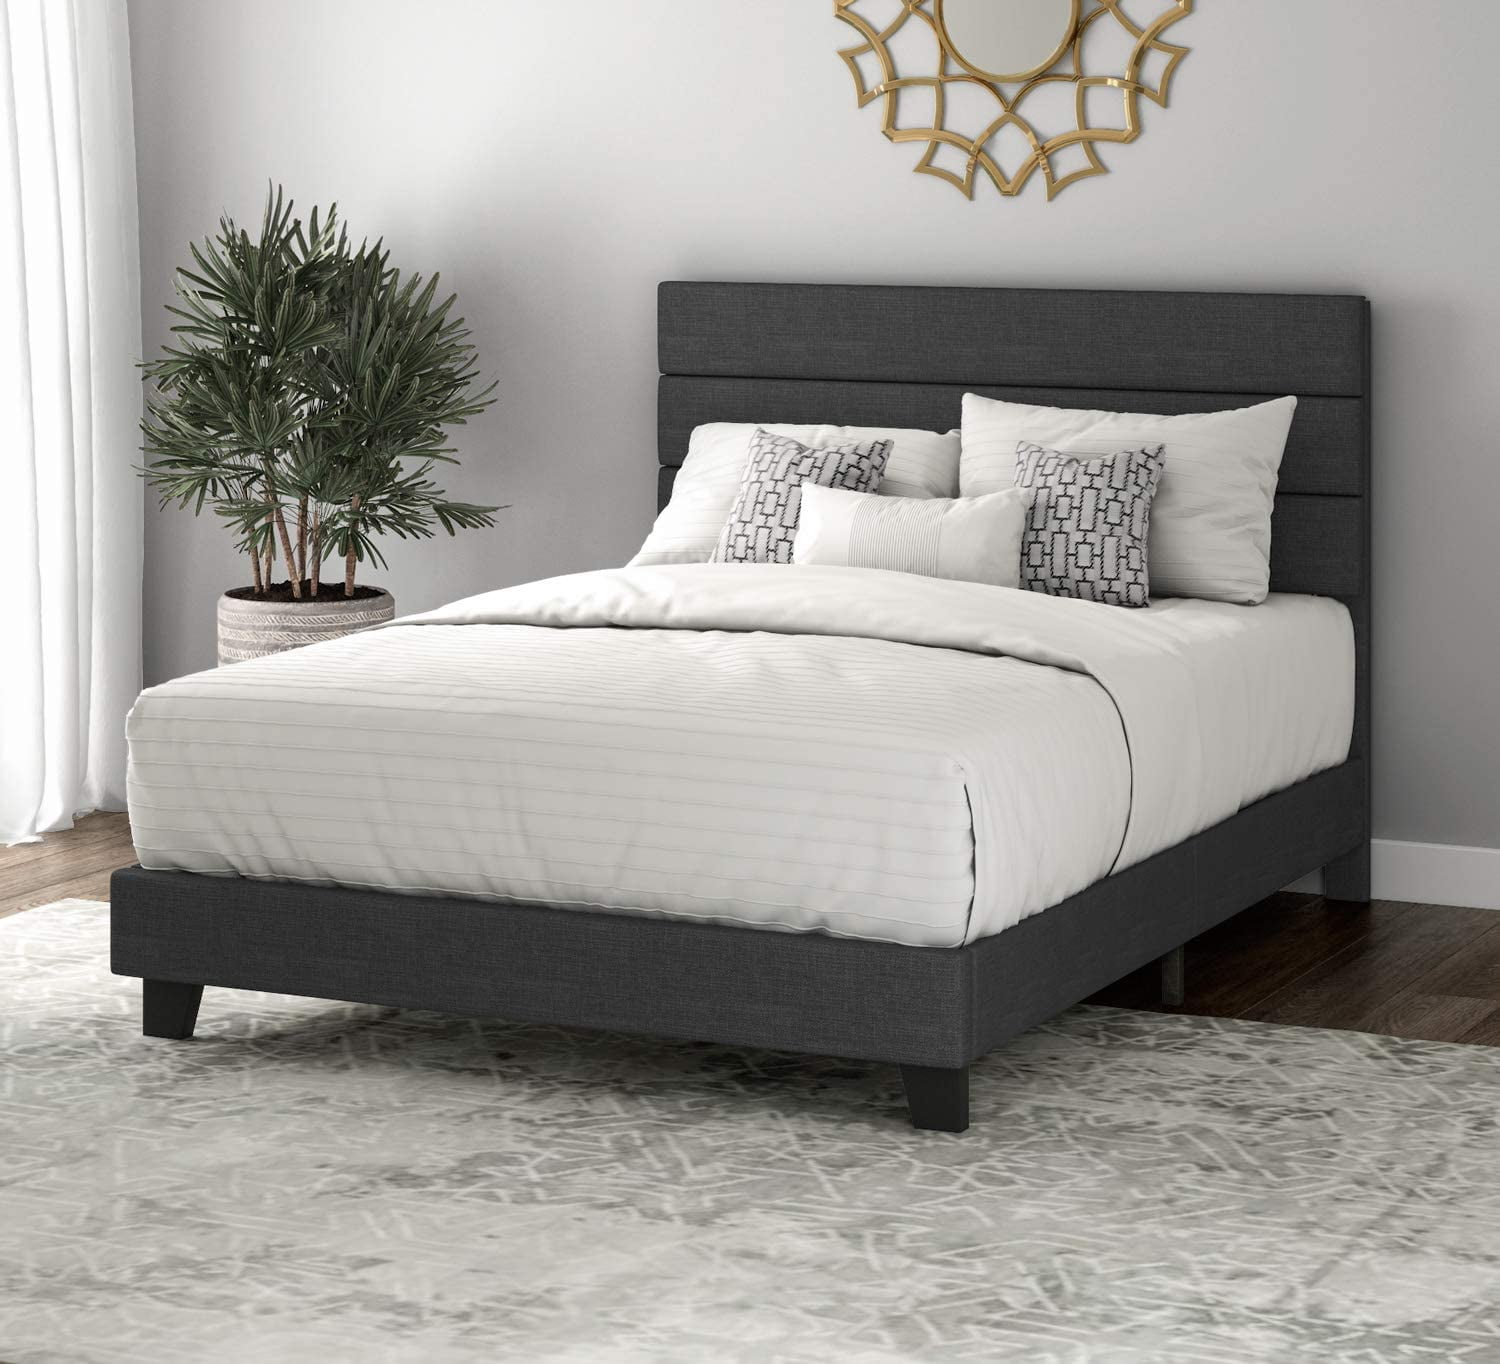 Choices of Sizes! Replaces Boxspring Boyd Sleek Support Wood Slat Platform Bed 